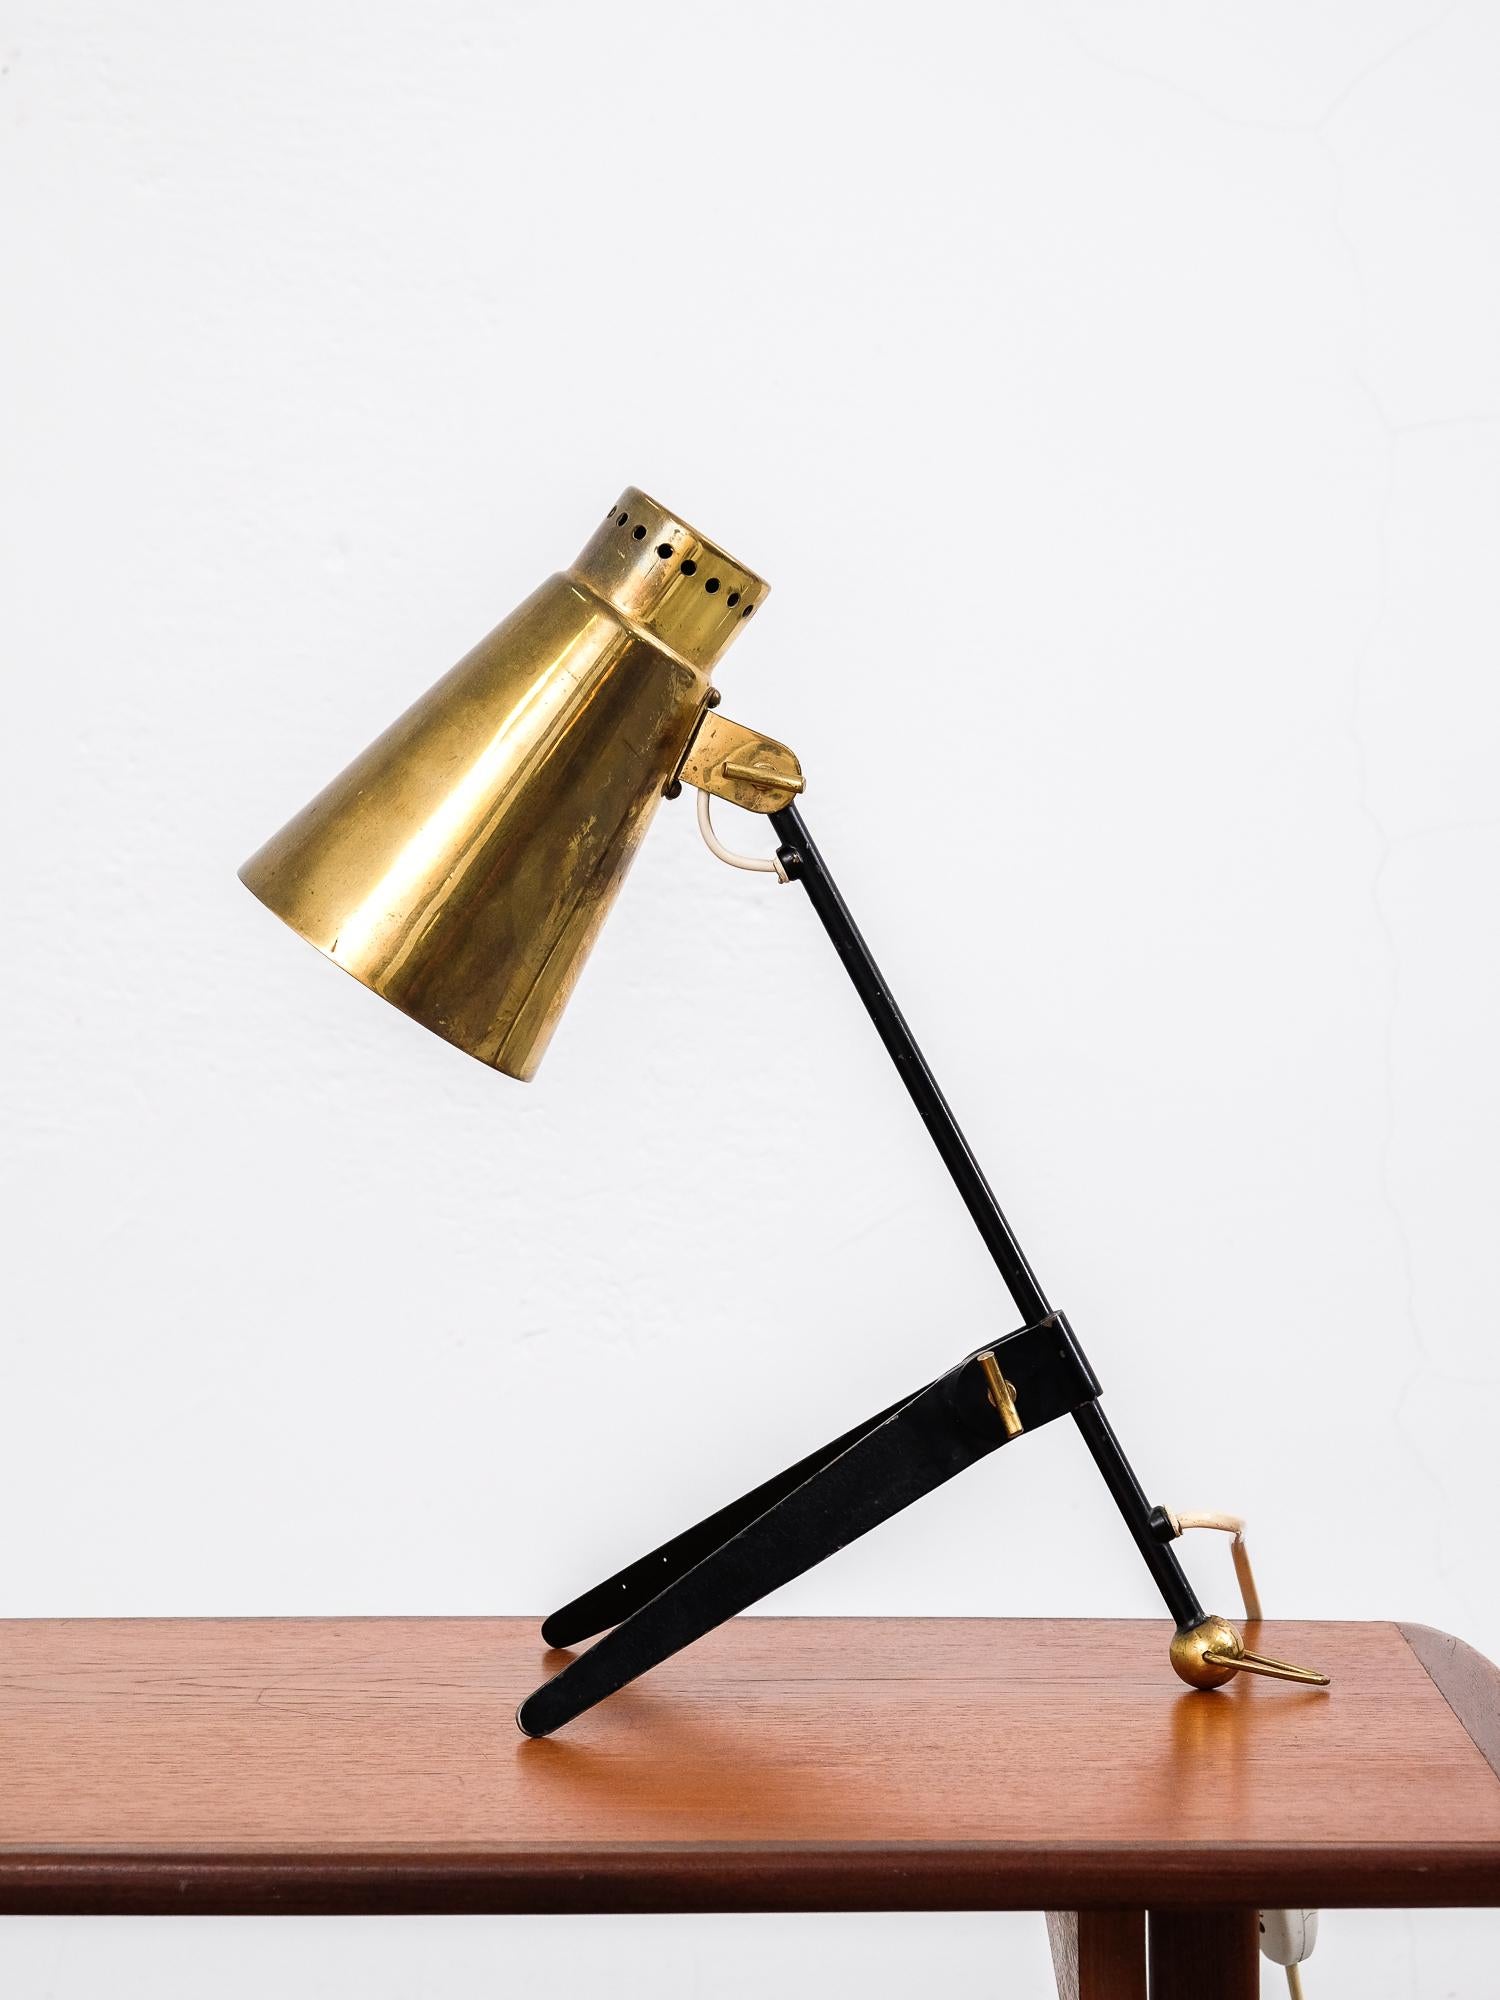 1950s table or wall lamp model 'EV70' by Finnish company Itsu. The lamp is made of a black lacquered metal base with a brass shade. The lamp rests on a brass ball with ring, which can also be used to hang the lamp from the wall.
A very rare lamp